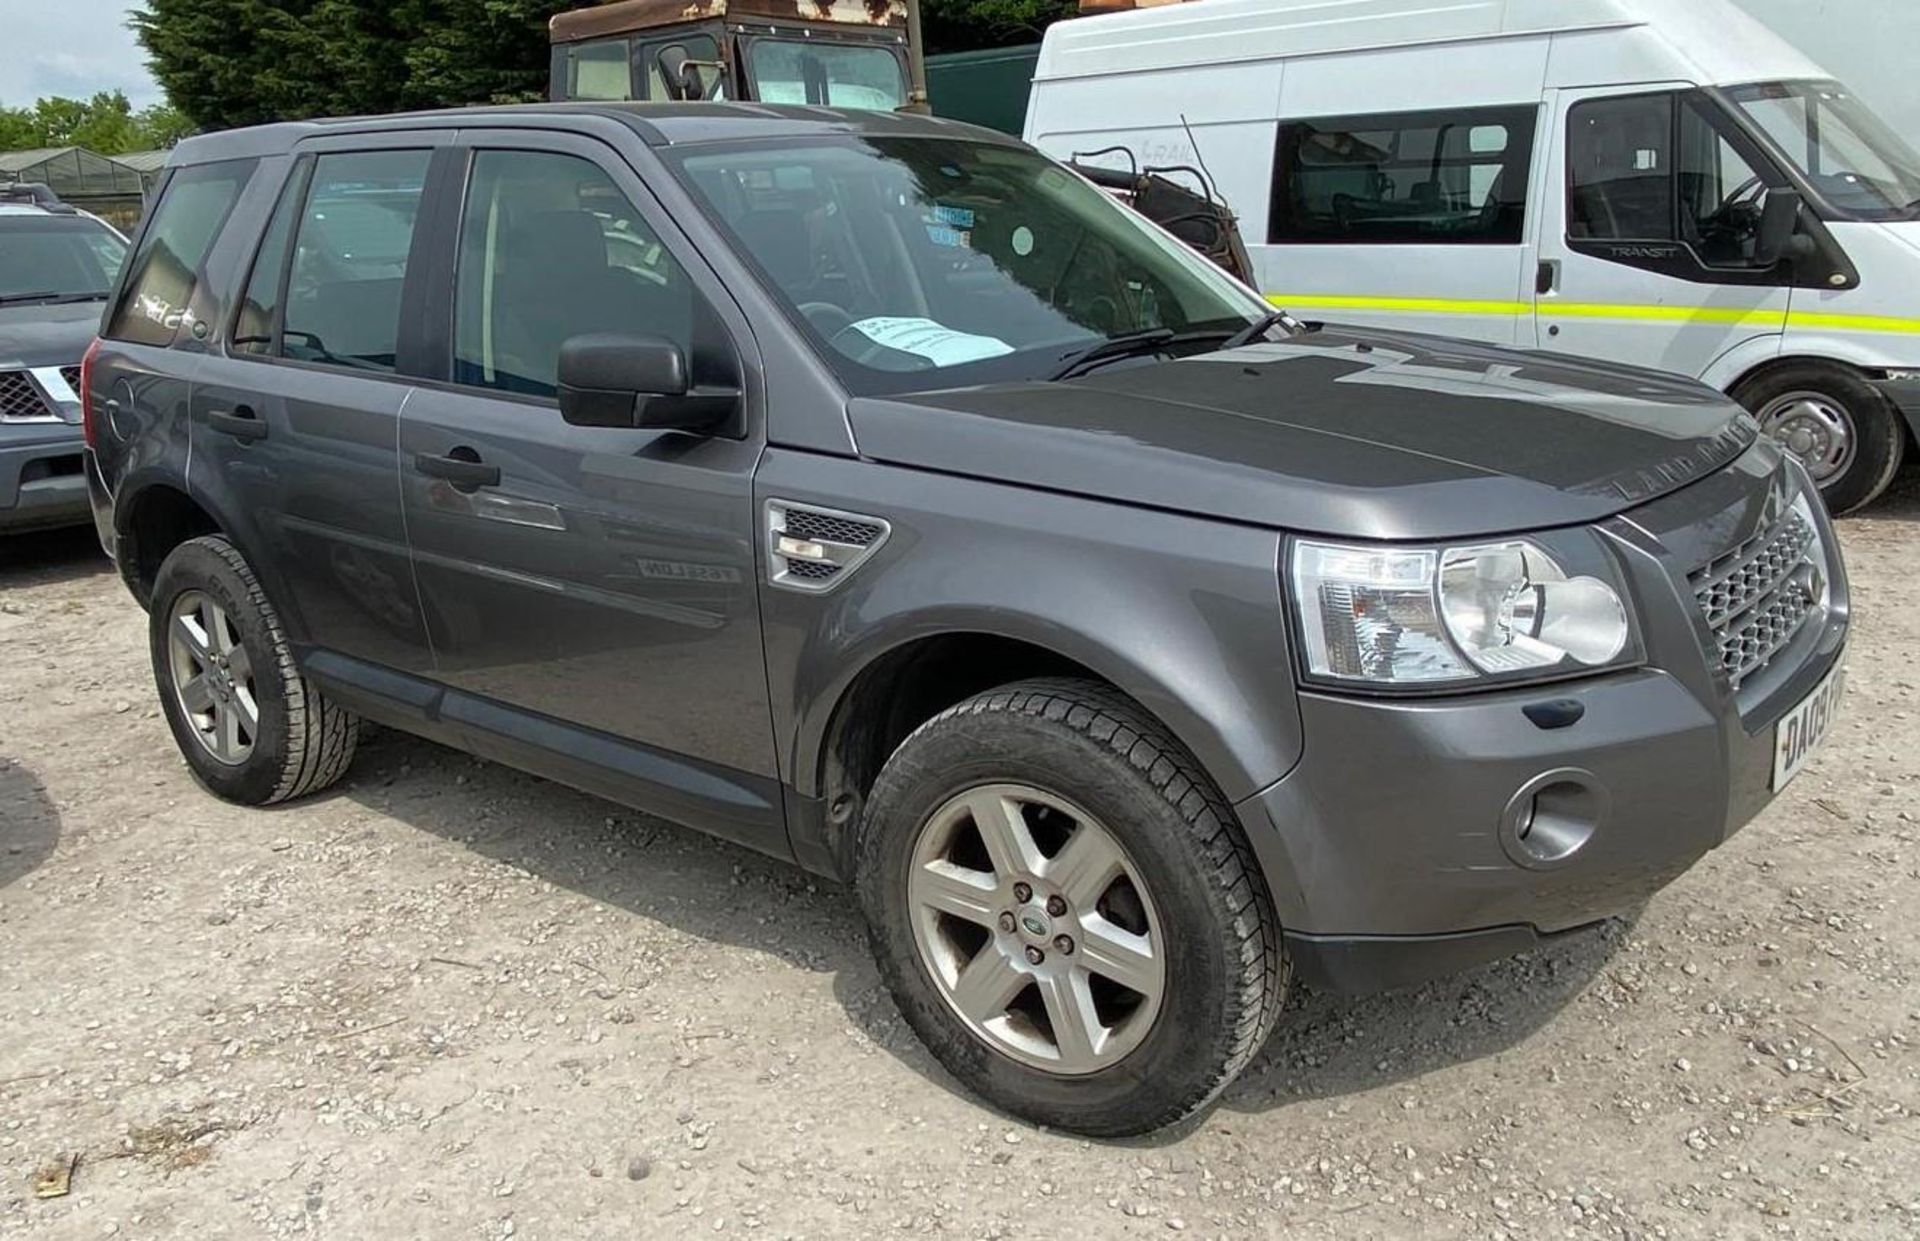 LAND ROVER FREELANDER 2 DA09FUO APPROX 110000 MILES MOT JAN 2025 THE VENDOR STATES IF THE CENTRAL - Image 2 of 3